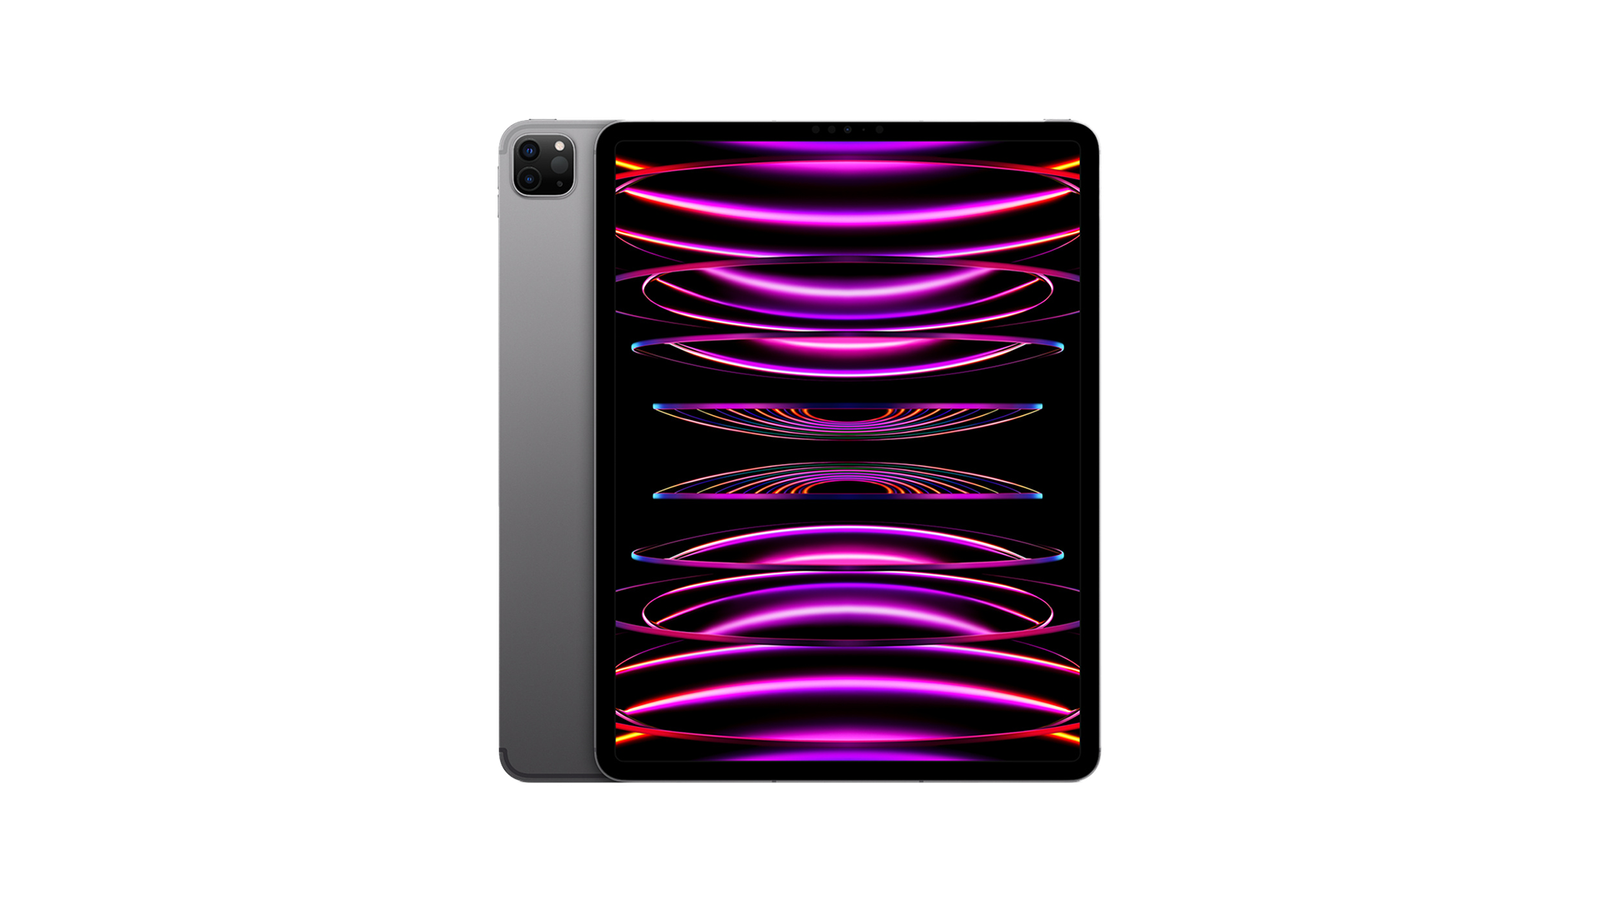 Apple iPad Pro 12.9 (M2, 2022) - The best iPad for graphic design overall